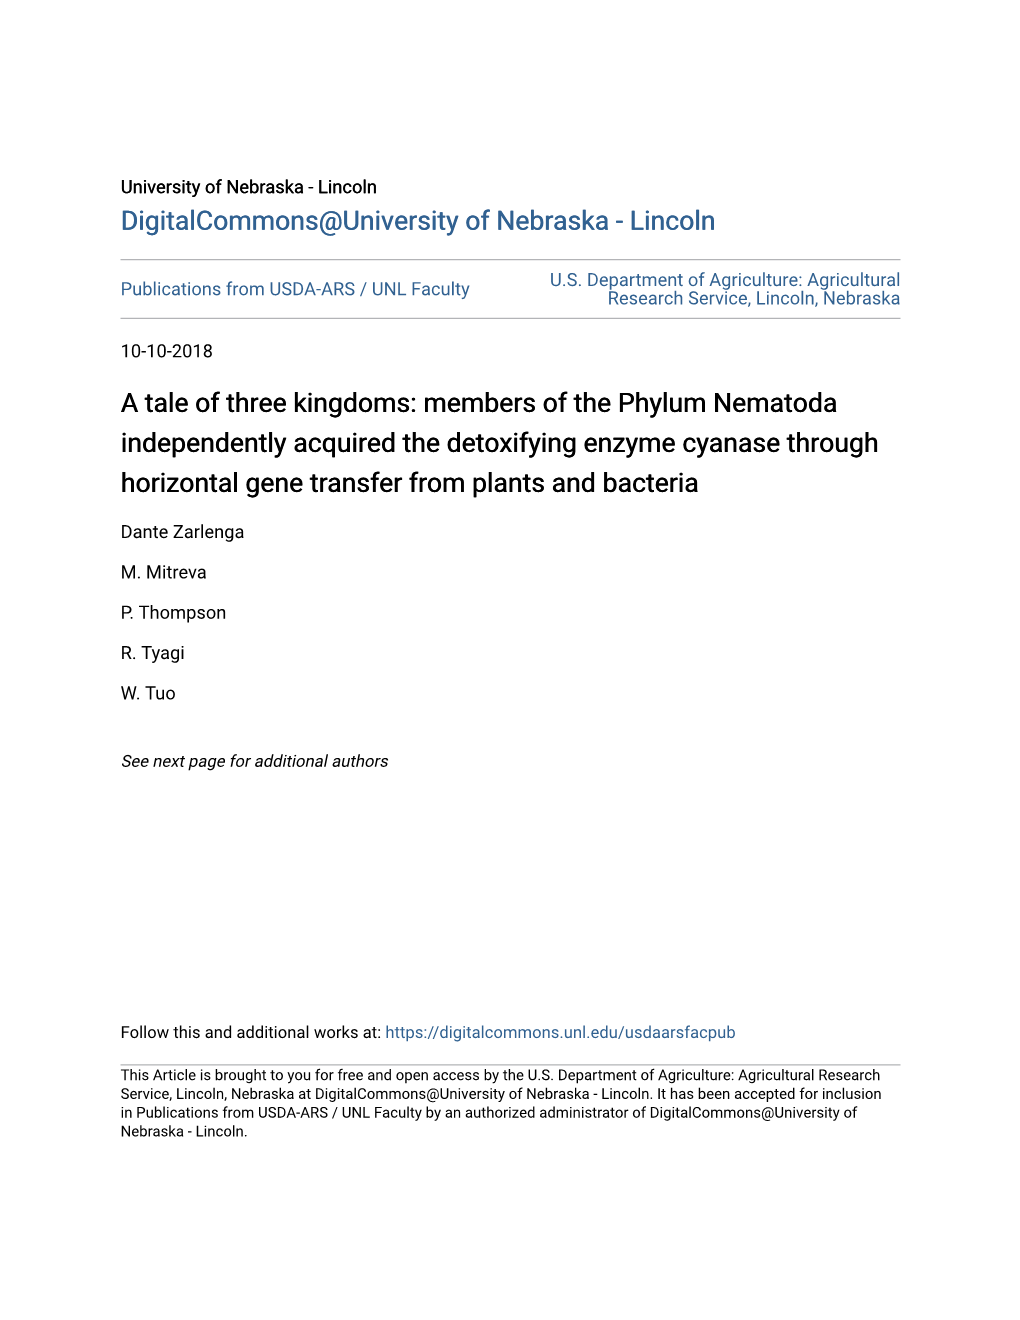 Members of the Phylum Nematoda Independently Acquired the Detoxifying Enzyme Cyanase Through Horizontal Gene Transfer from Plants and Bacteria